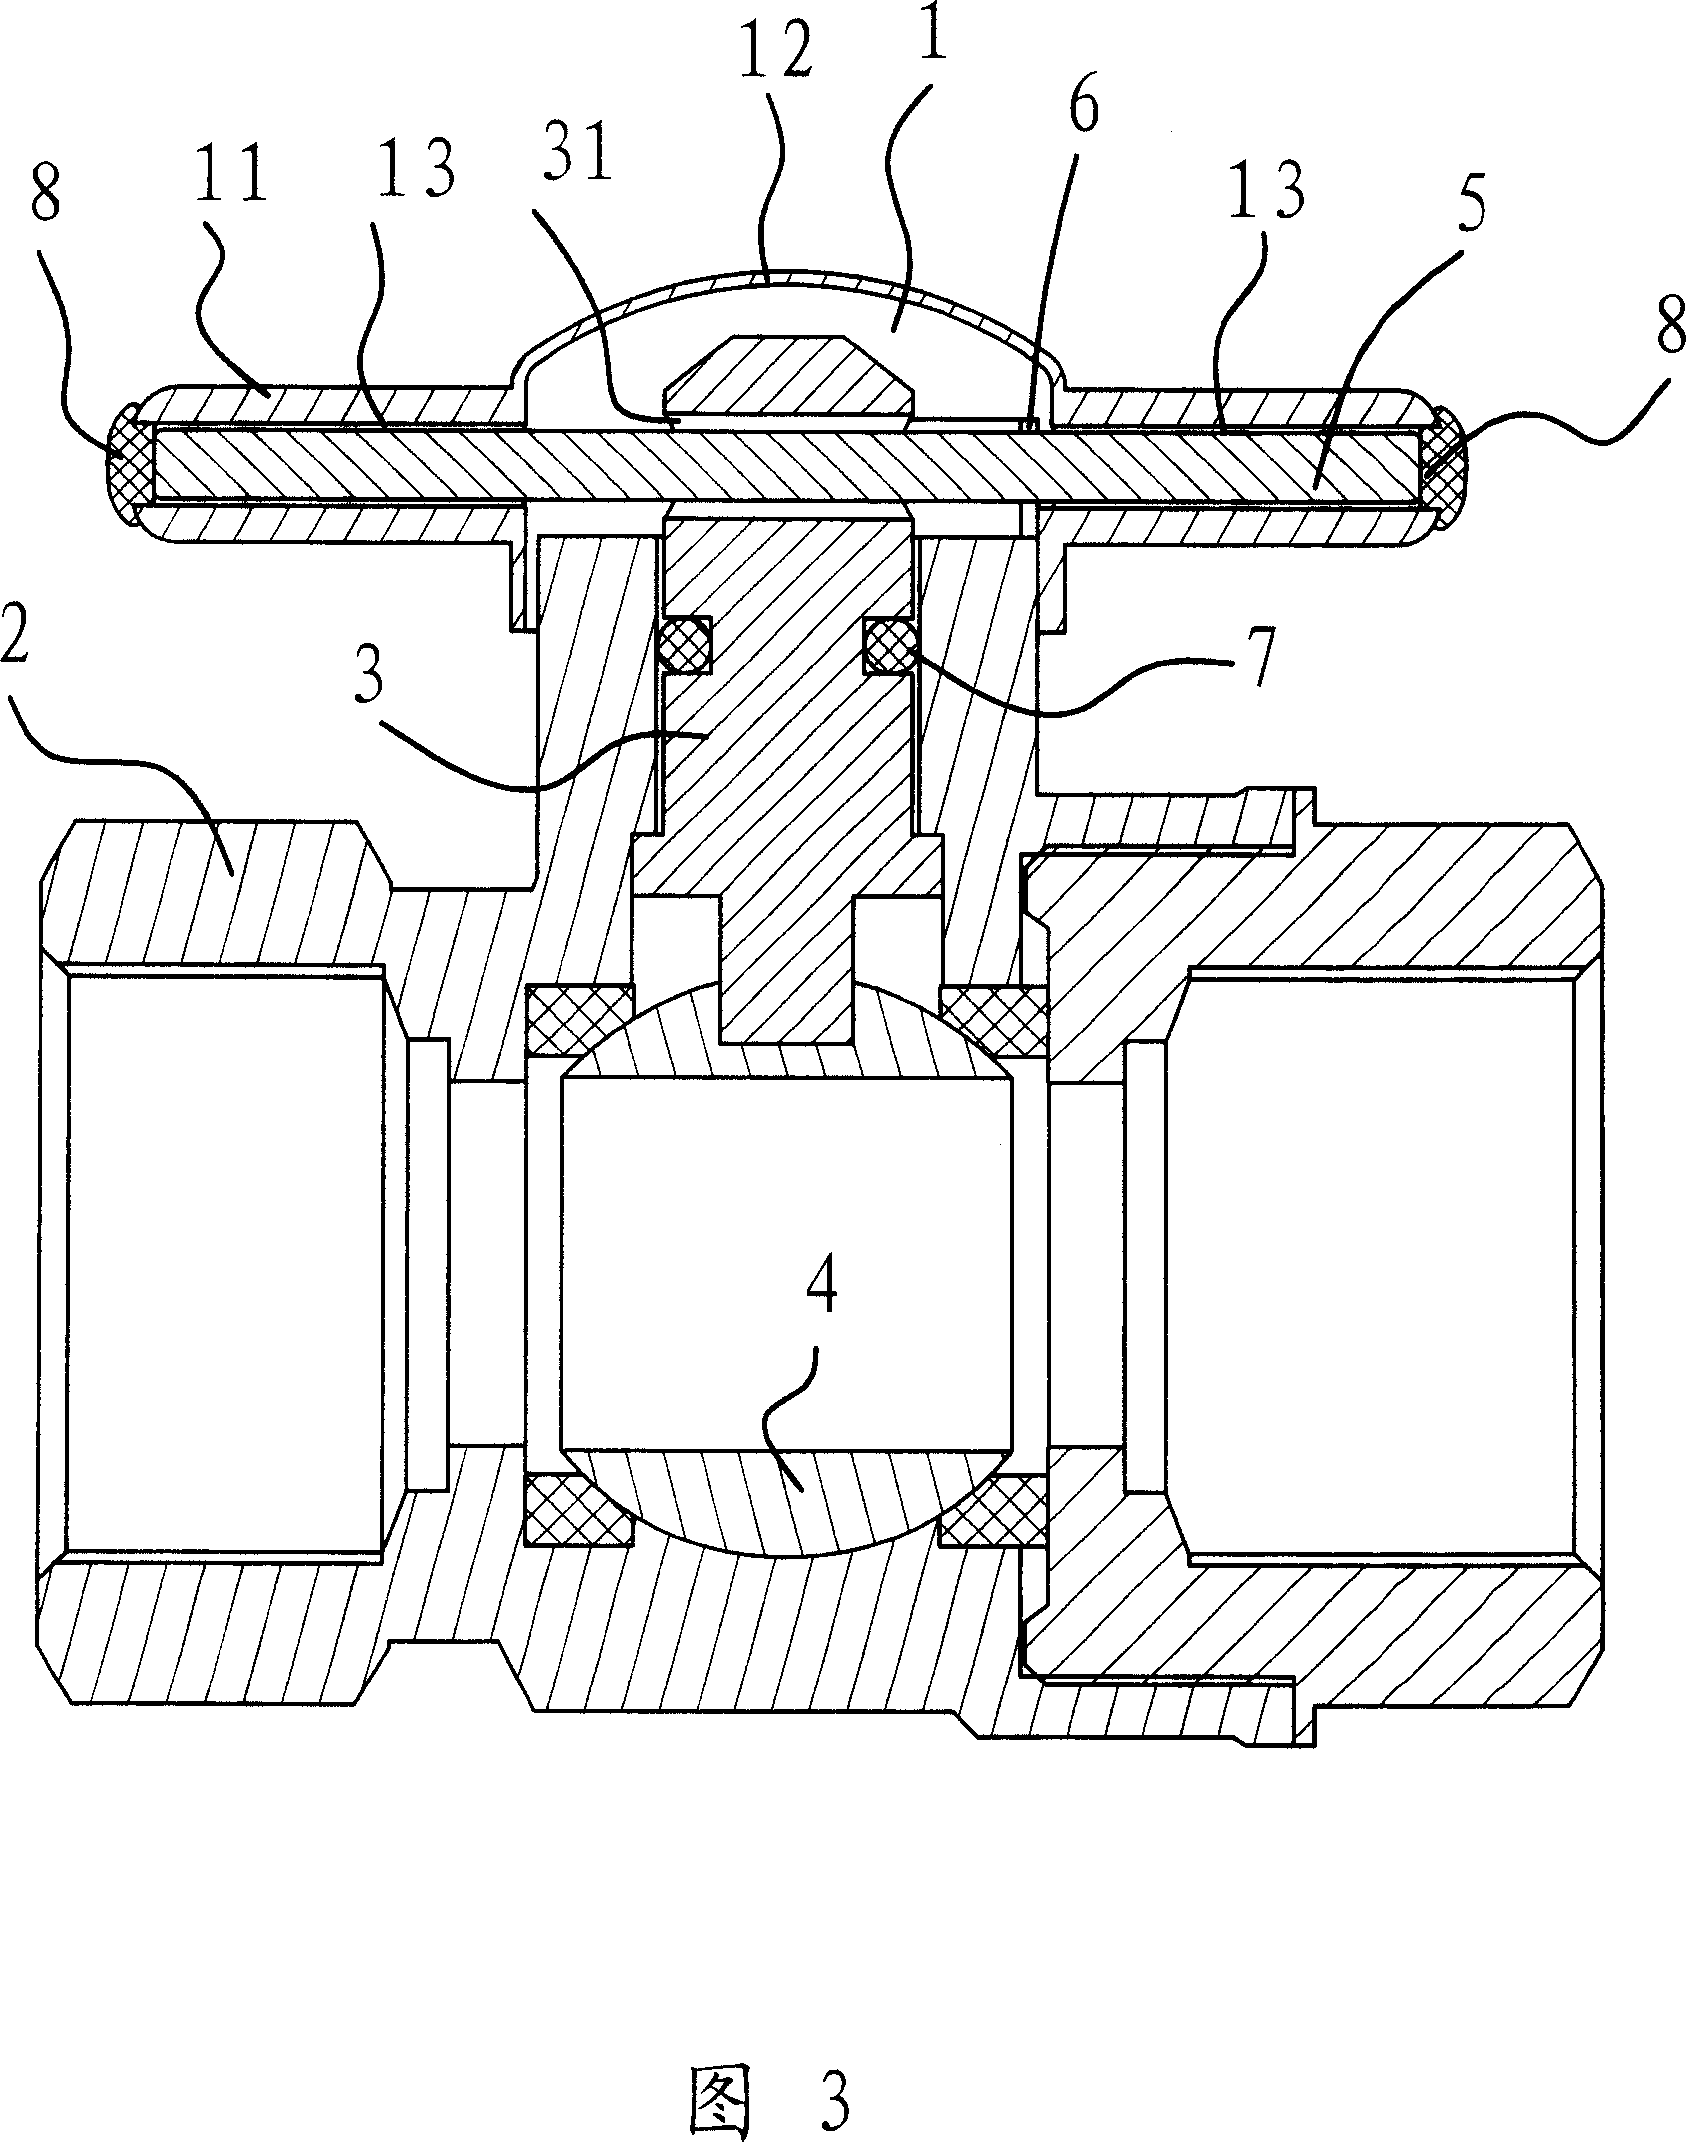 Connection structure for ball valve handle